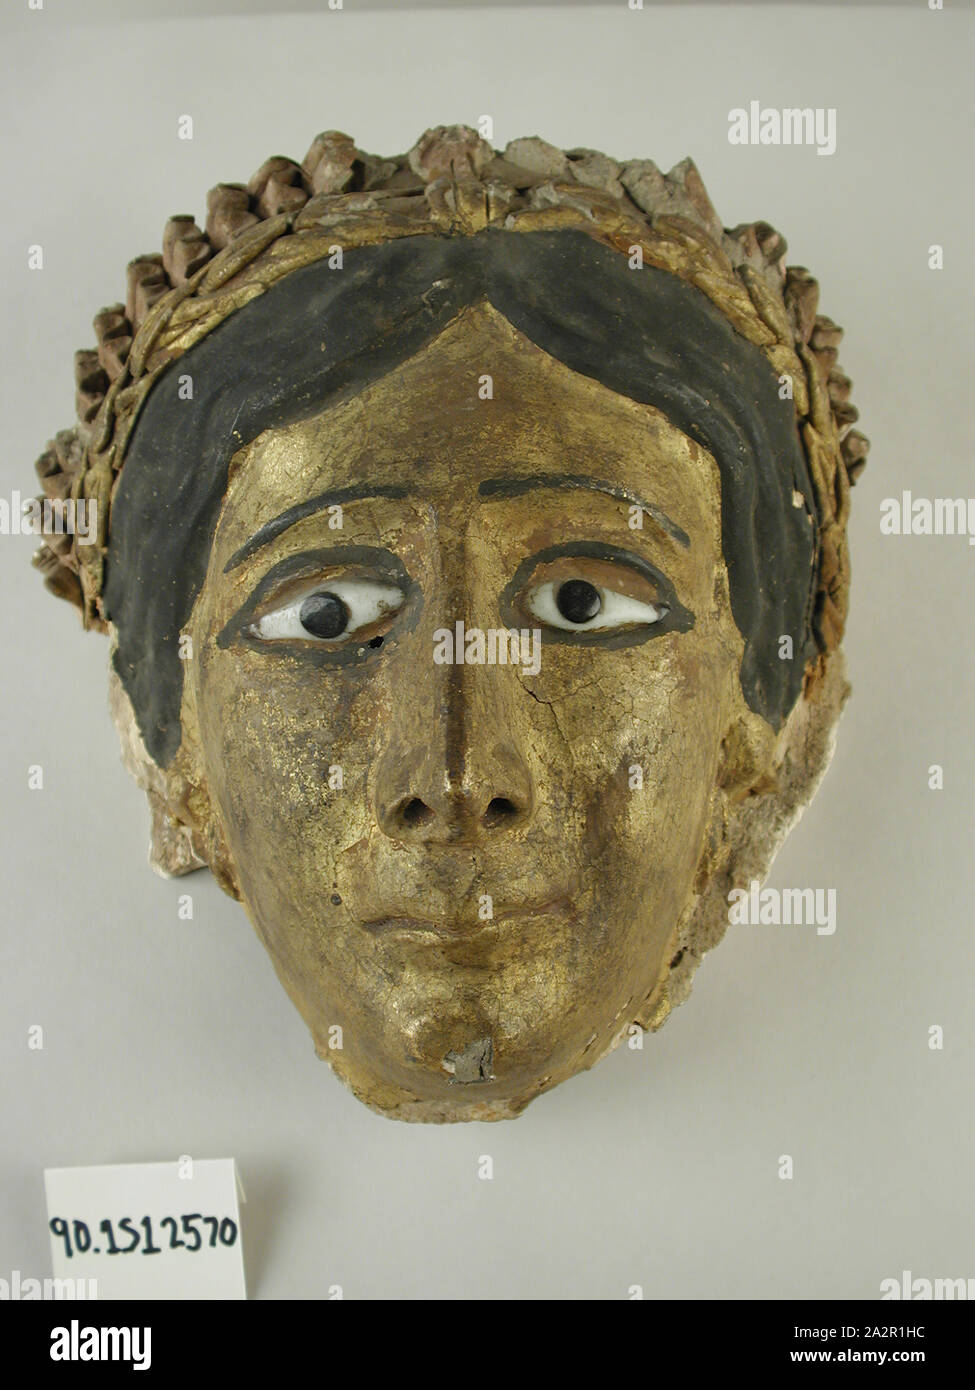 Egyptian, Mummy Mask of a Woman, 2nd Century AD, painted plaster, 11 1/8 x 9 1/2 x 5 5/8 in. (28.3 x 24.13 x 14.3 cm Stock Photo